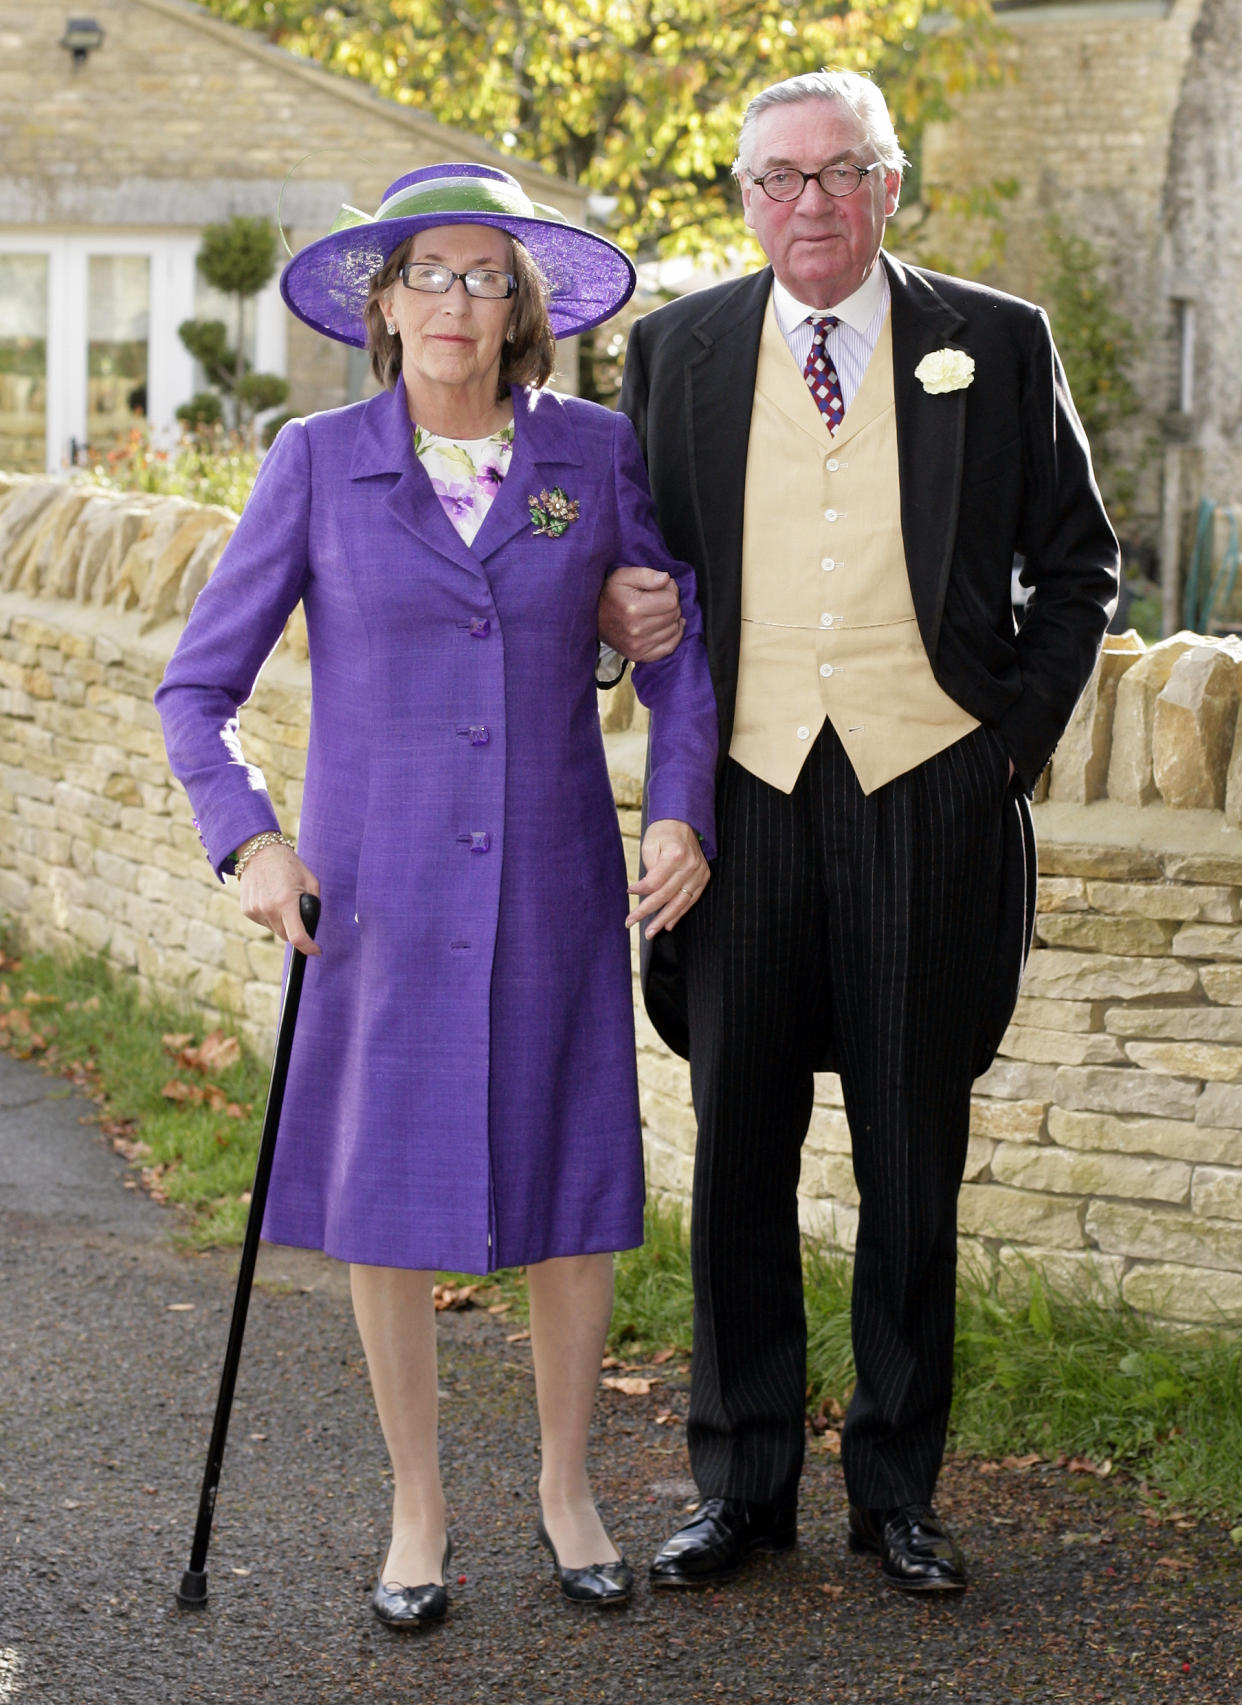 NORTHLEACH, UNITED KINGDOM - OCTOBER 23: (EMBARGOED FOR PUBLICATION IN UK NEWSPAPERS UNTIL 48 HOURS AFTER CREATE DATE AND TIME) Lady Celia Vestey and Lord Samuel Vestey attend Harry Meade & Rosie Bradford's wedding at the Church of St. Peter and St. Paul on October 23, 2010 in Northleach near Cheltenham, England. (Photo by Indigo/Getty Images)